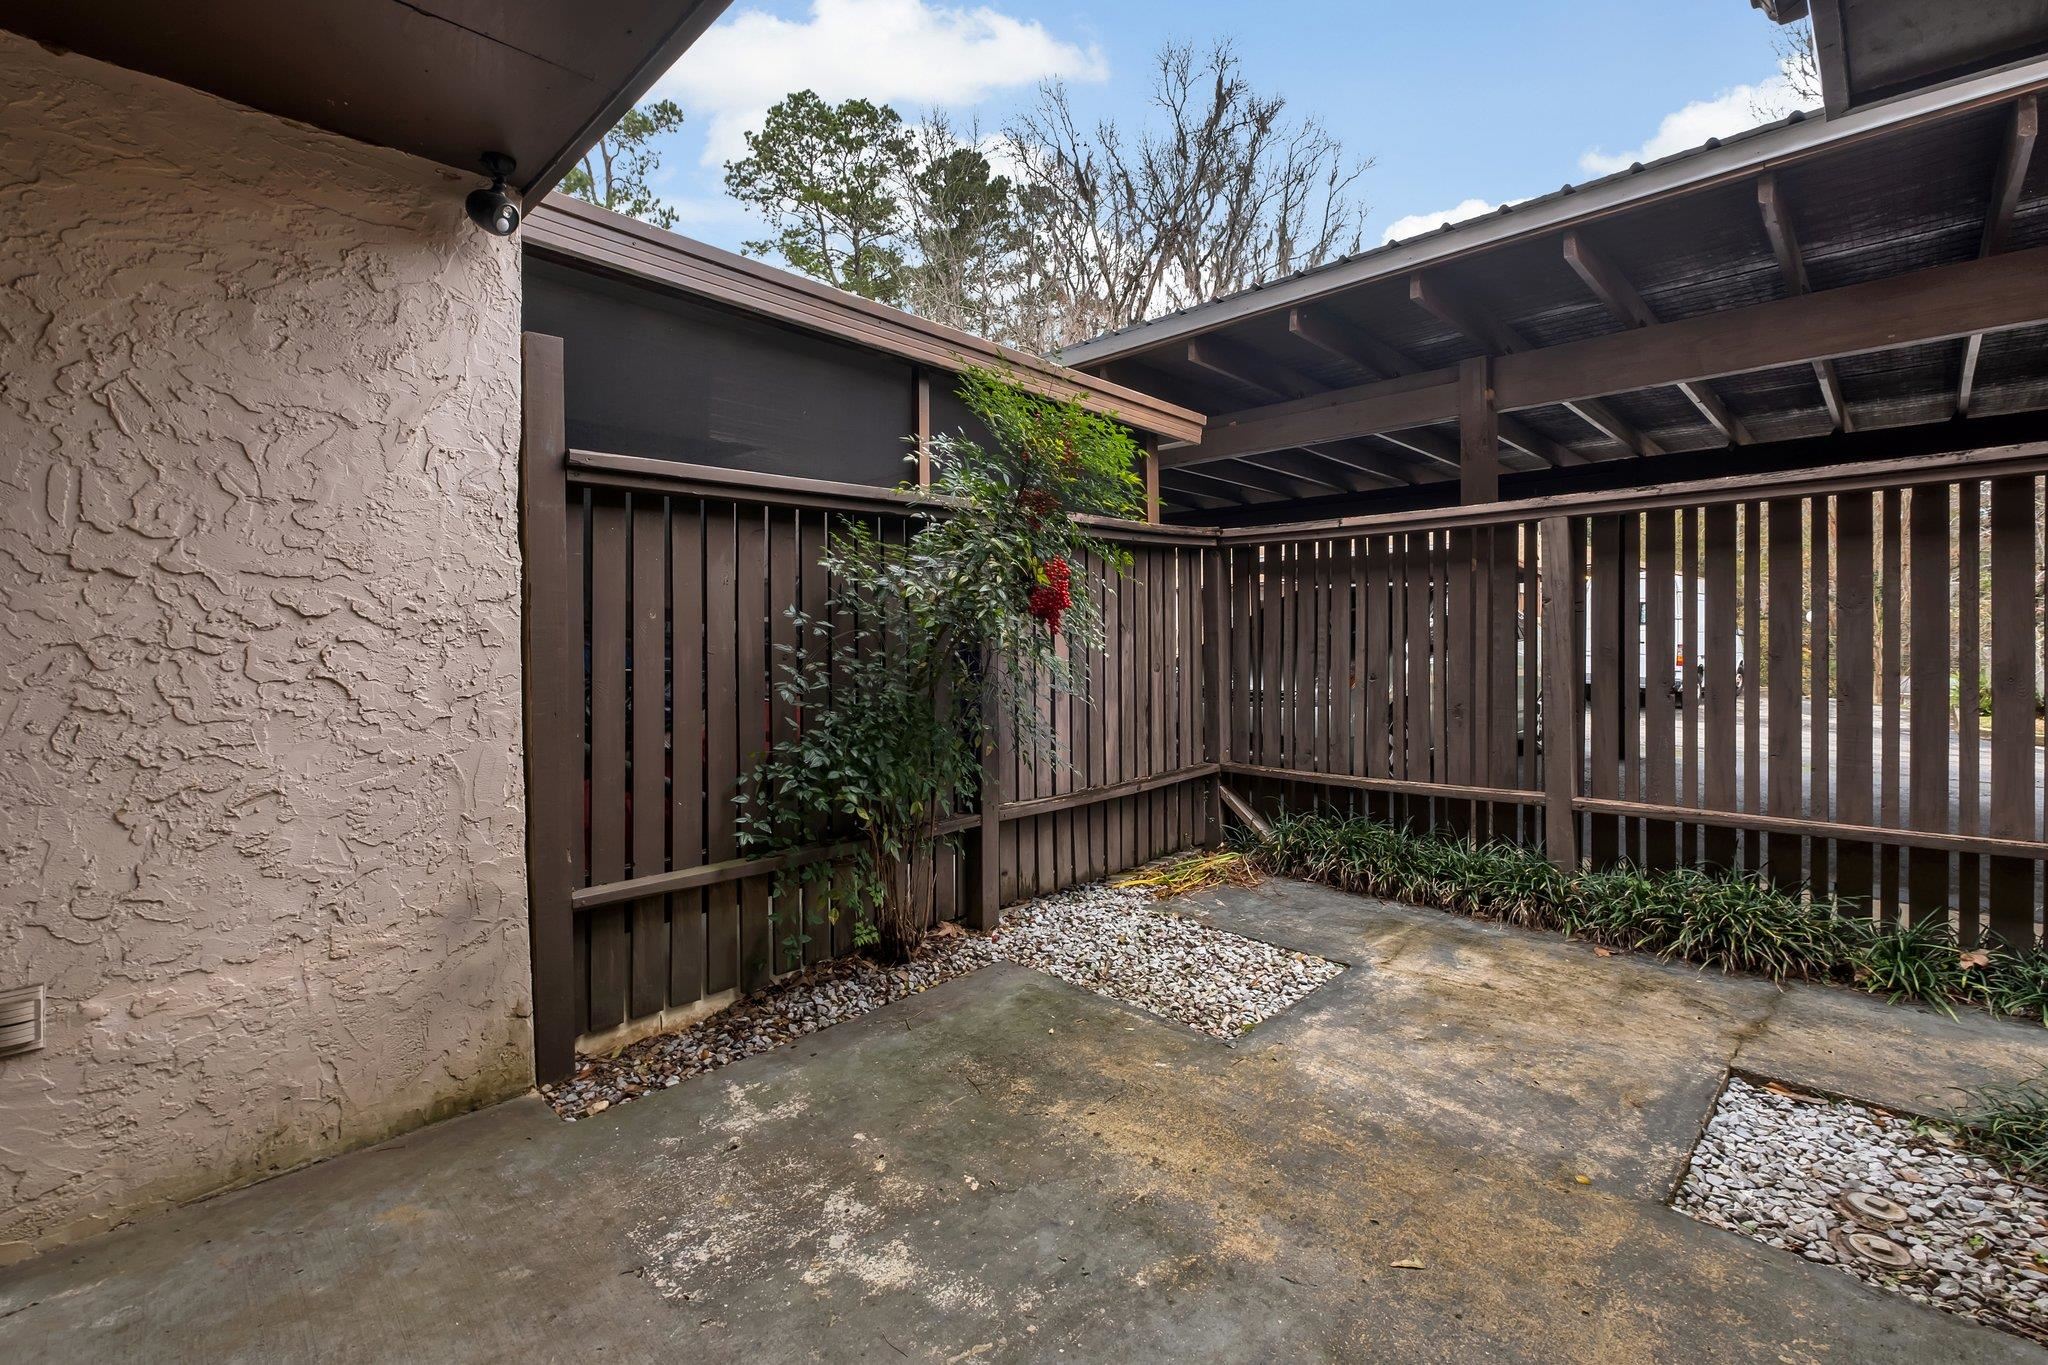 303 Westwood Drive,TALLAHASSEE,Florida 32304,2 Bedrooms Bedrooms,2 BathroomsBathrooms,Condo,303 Westwood Drive,369148